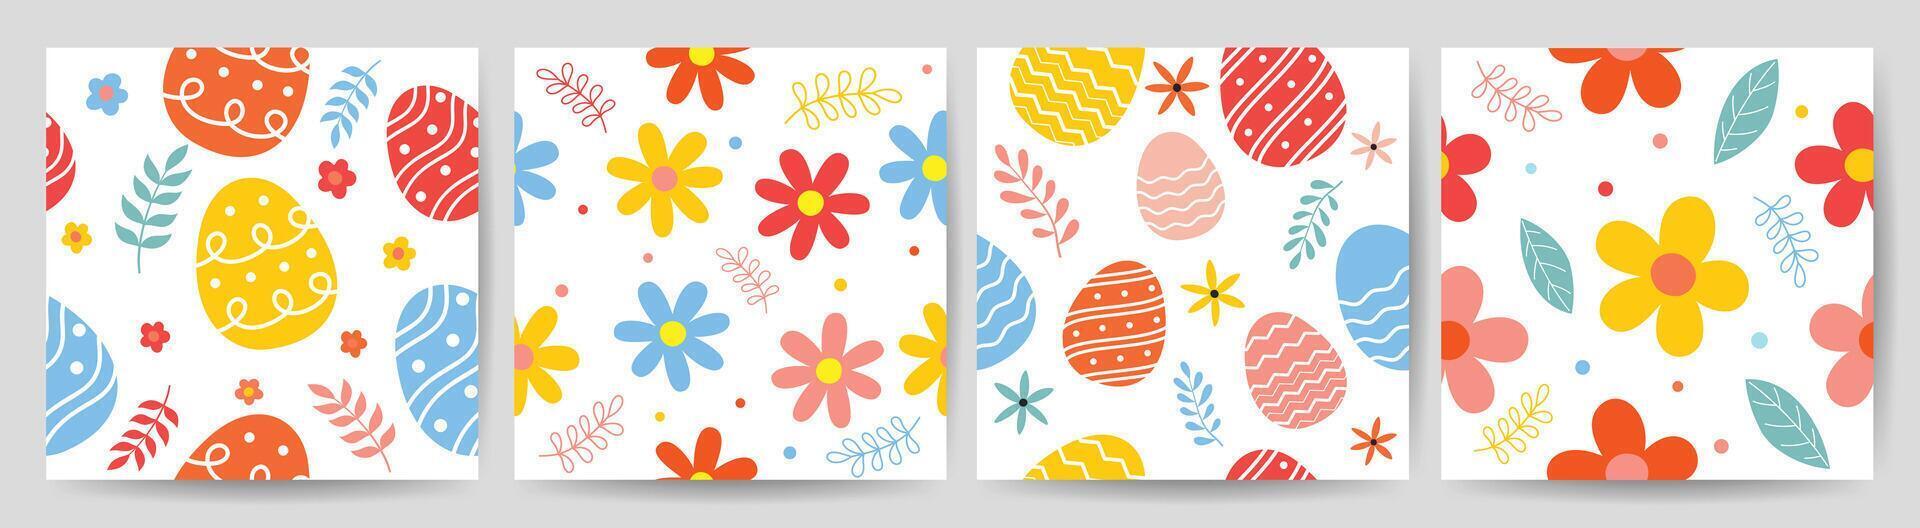 Happy Easter seamless pattern vector. Set of square cover design with easter egg, flower, foliage. Spring season repeated in fabric pattern for prints, wallpaper, cover, packaging, kids, ads. vector